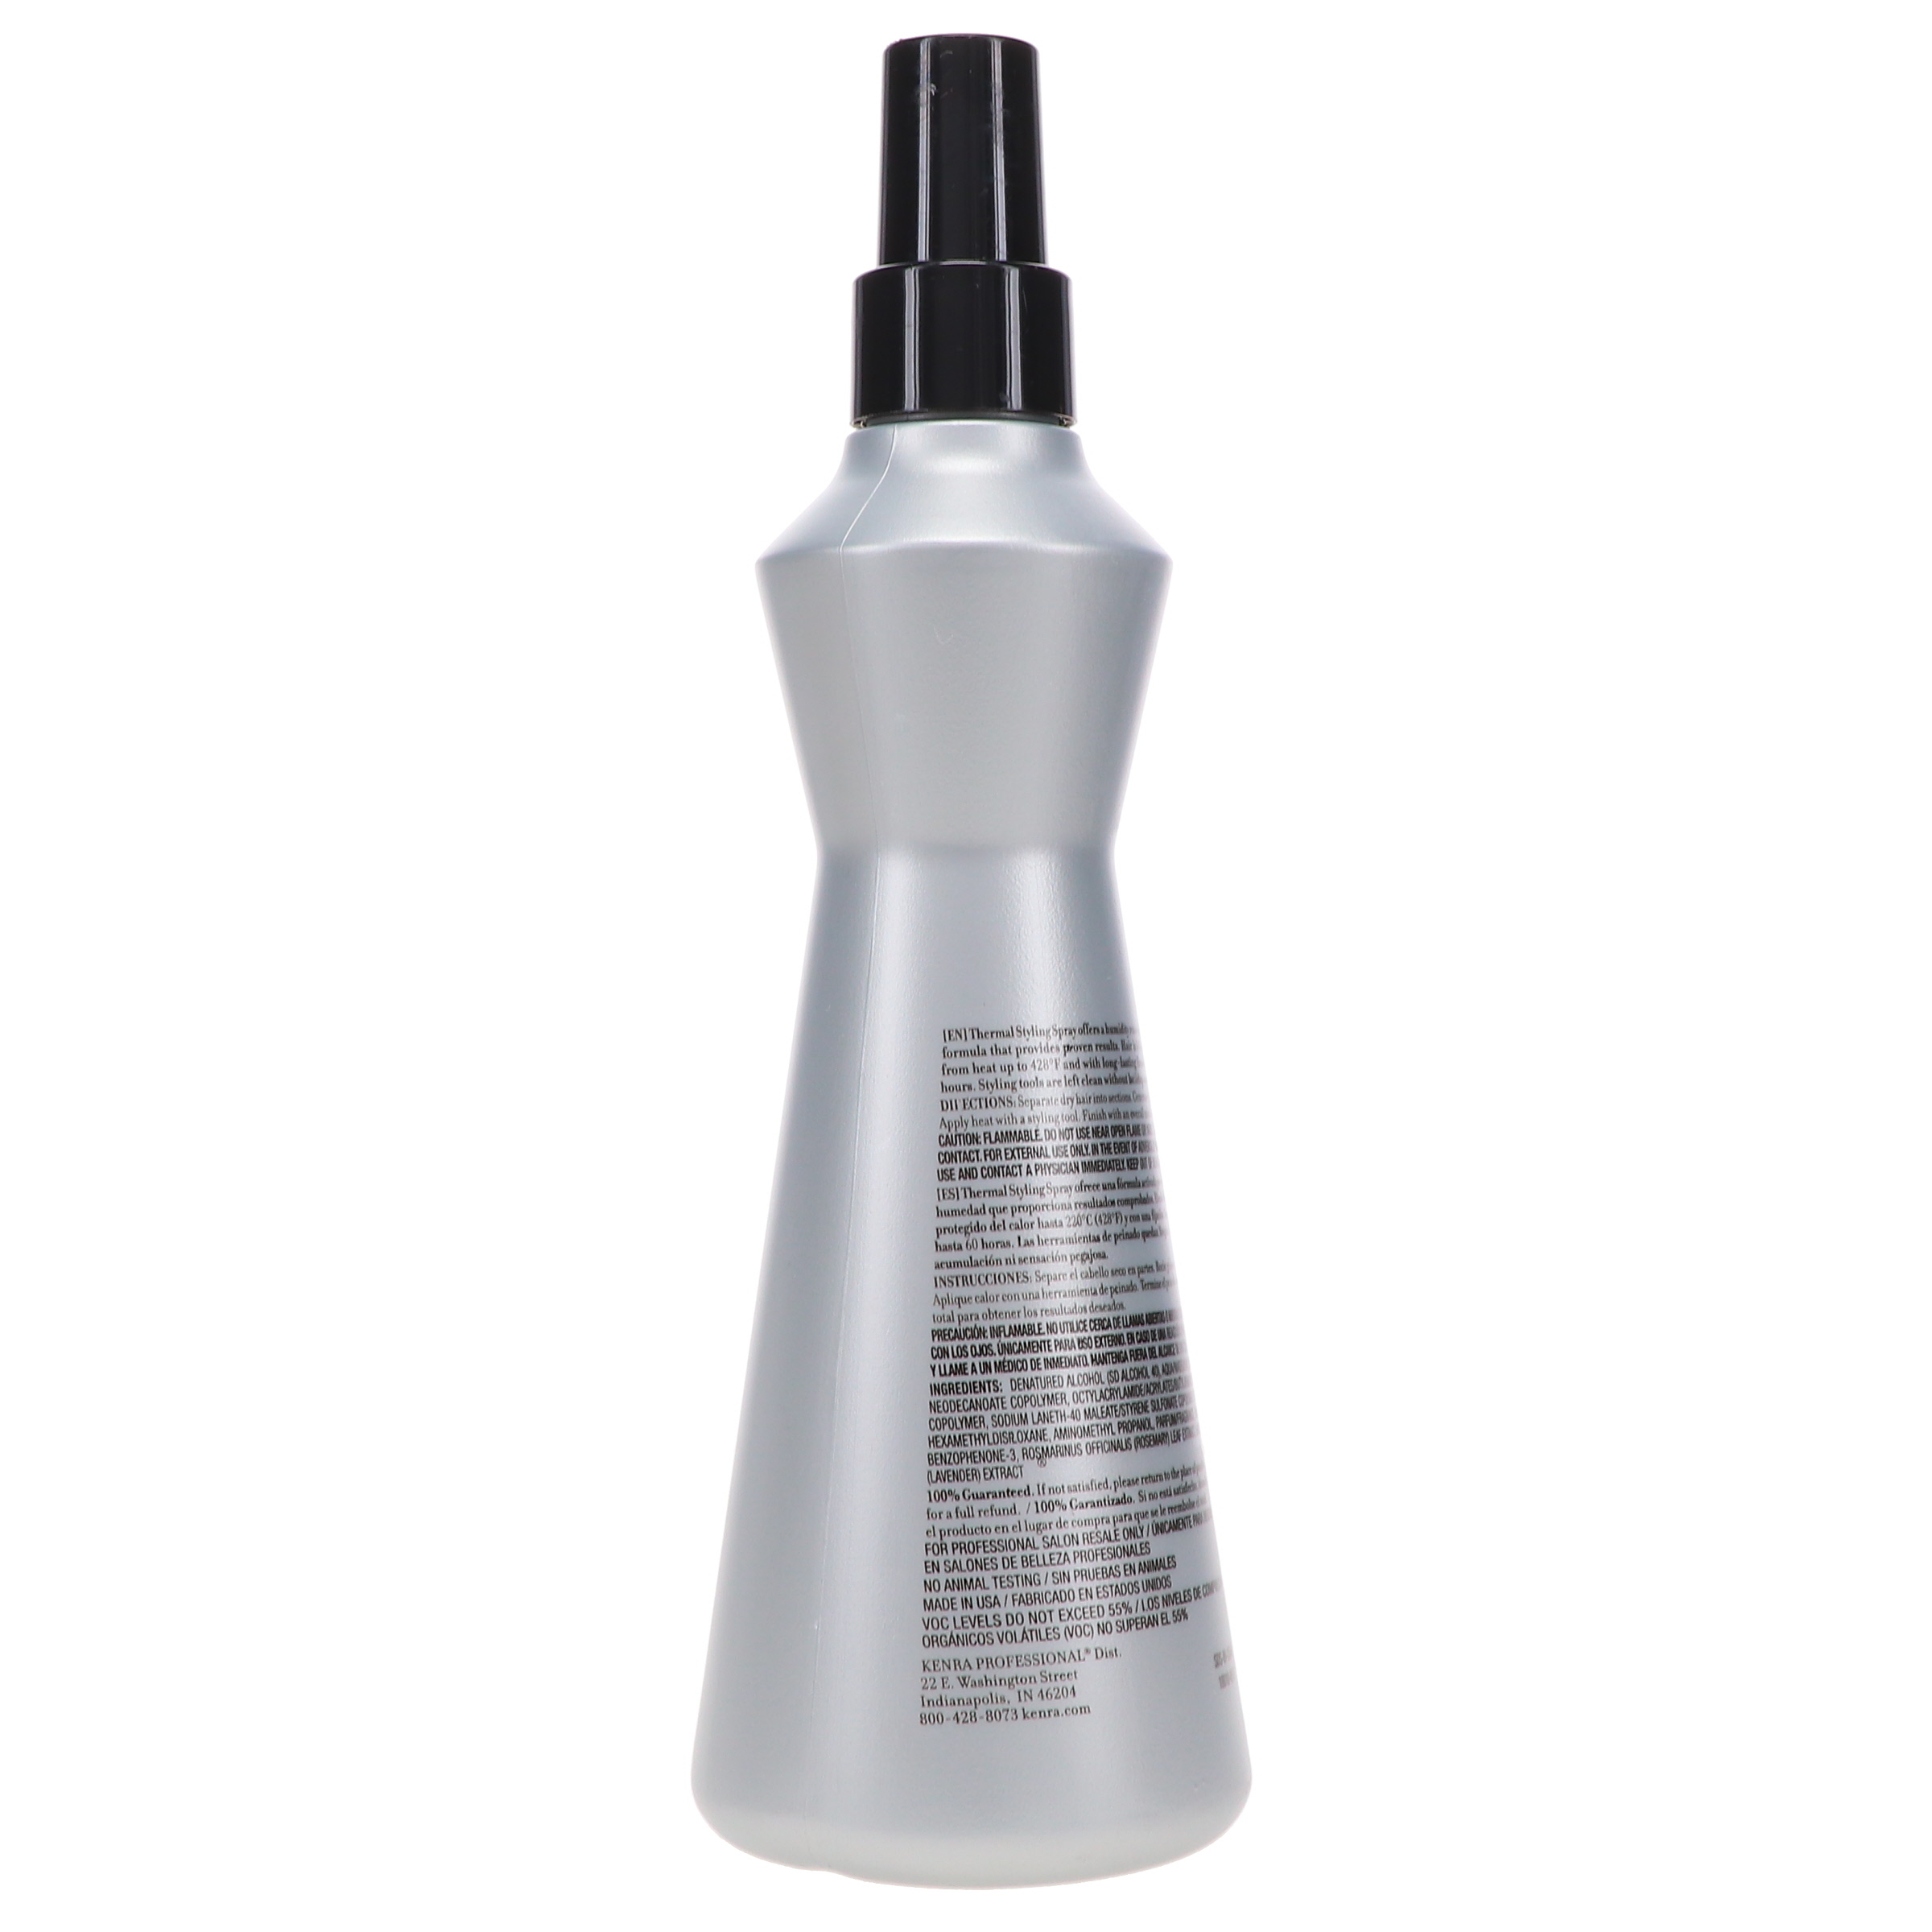 Kenra Thermal Styling Spray #19 10.1 oz - image 4 of 8